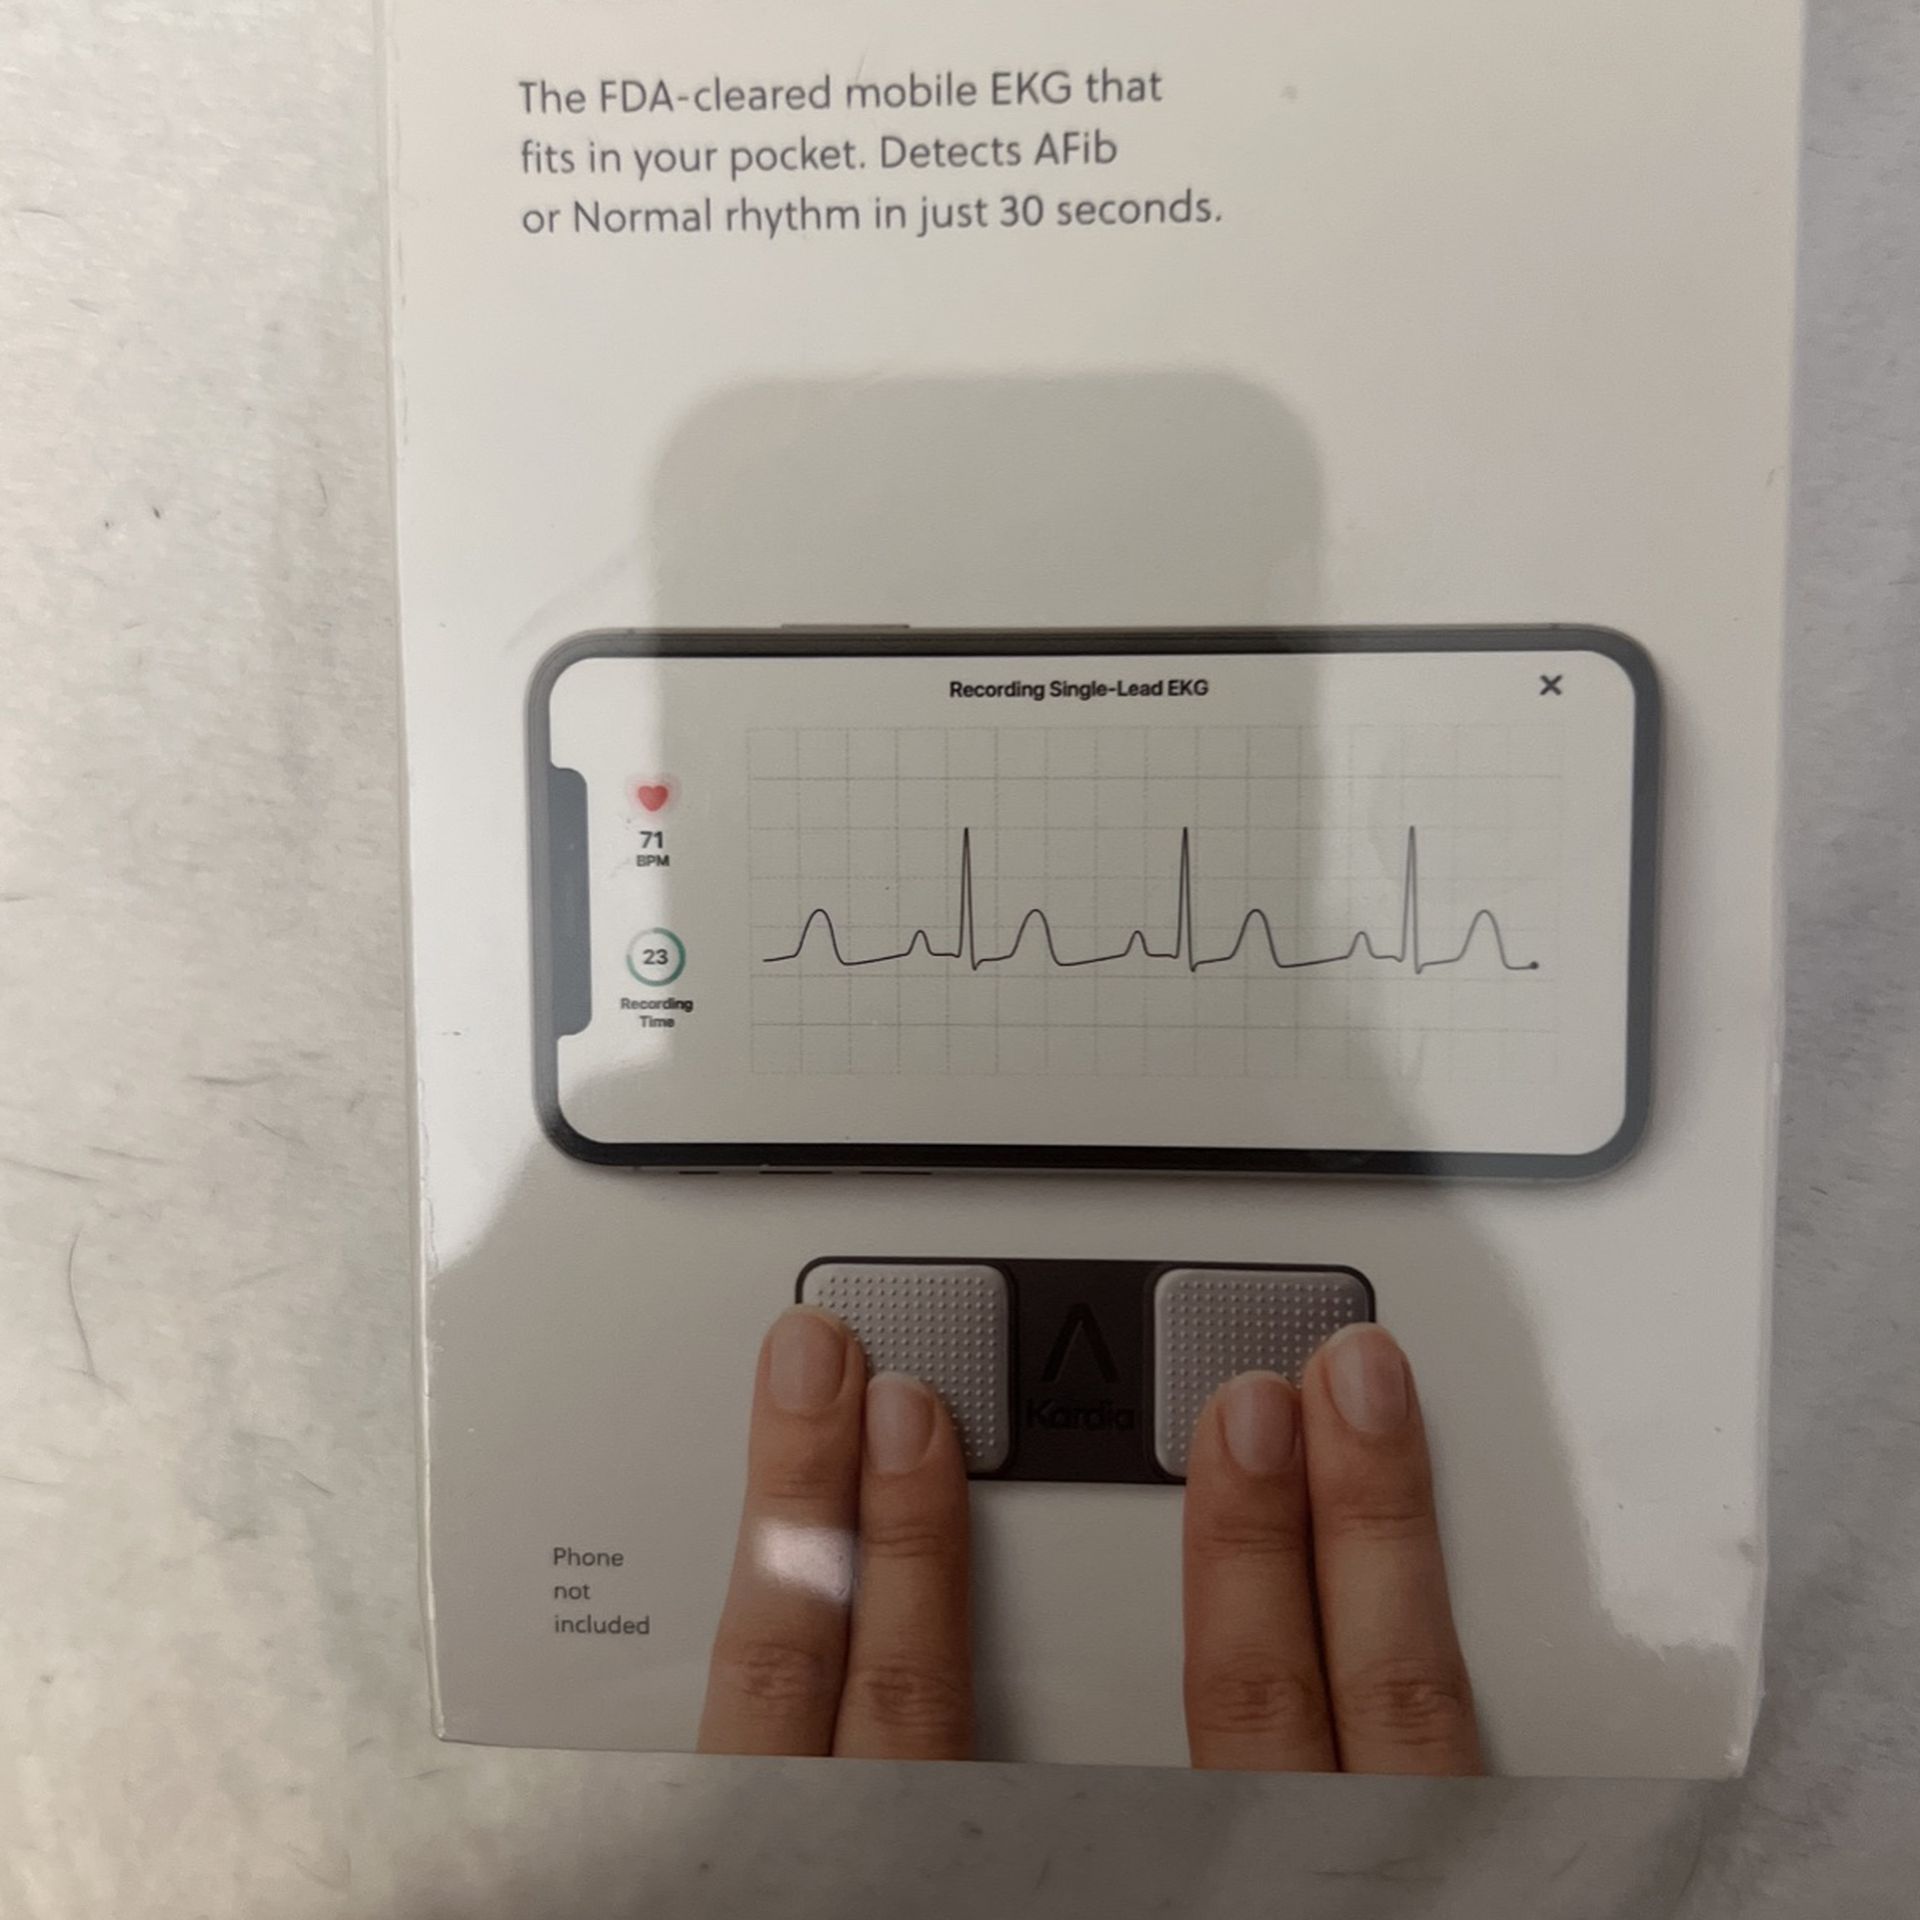 KardiaMobile 1-Lead Personal EKG Monitor – Record EKGs at Home – Detects  AFib and Irregular Arrhythmias – Instant Results in 30 Seconds – Easy to  Use